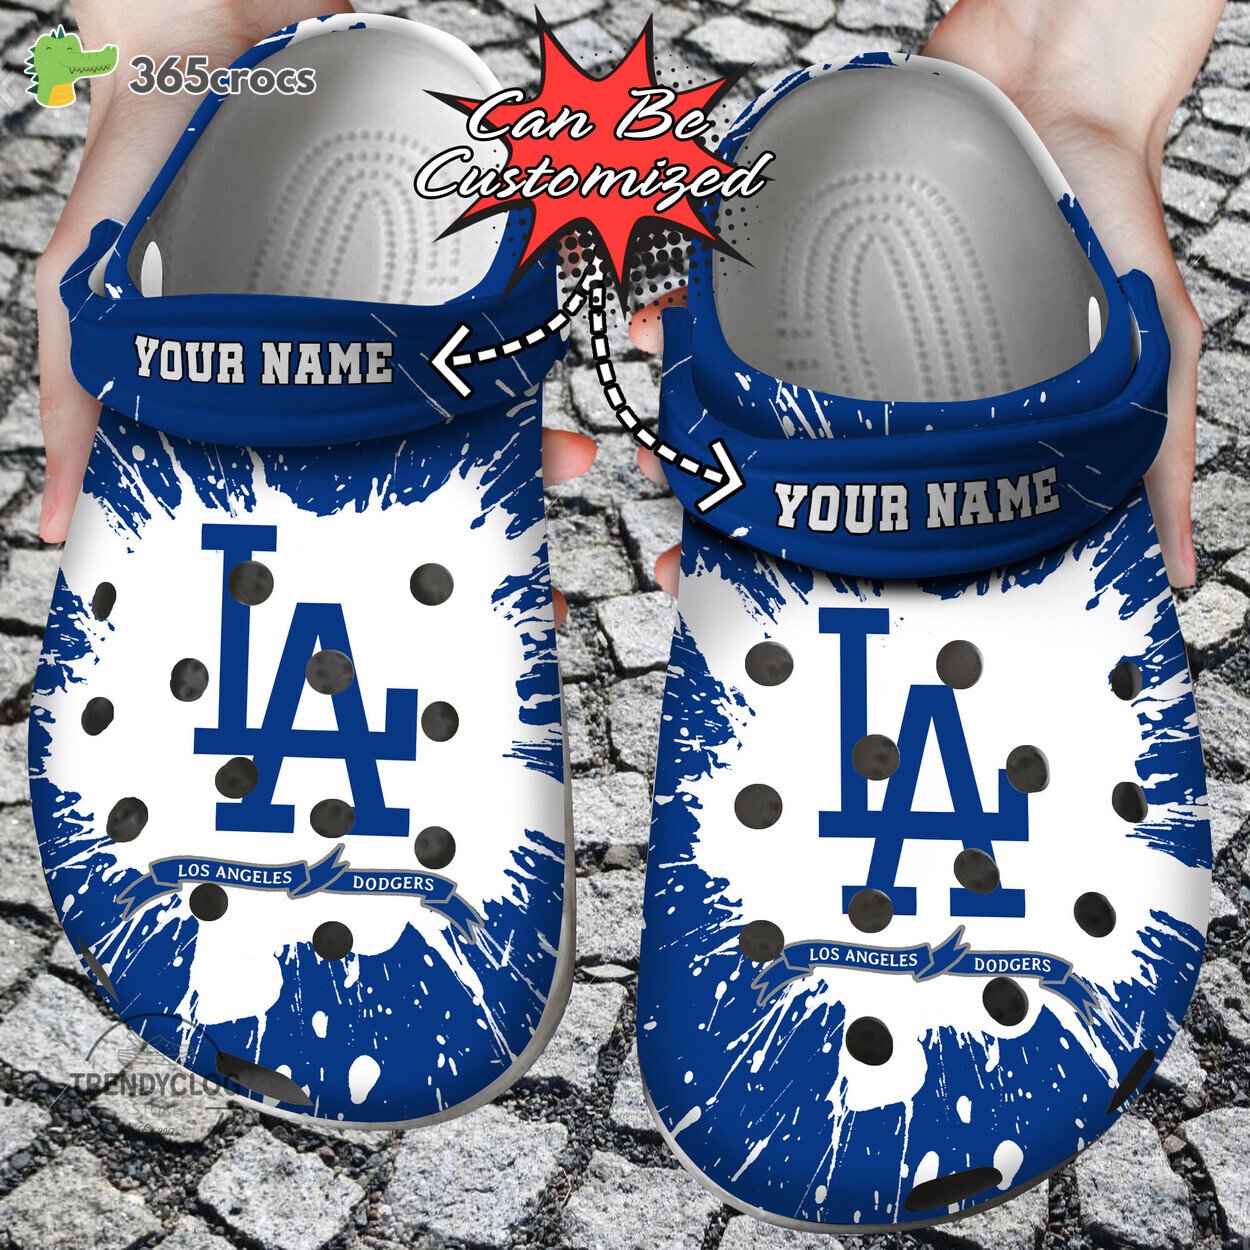 Los Angeles Dodgers Baseball Team Customized Name Comfort Crocss Clogs Shoes